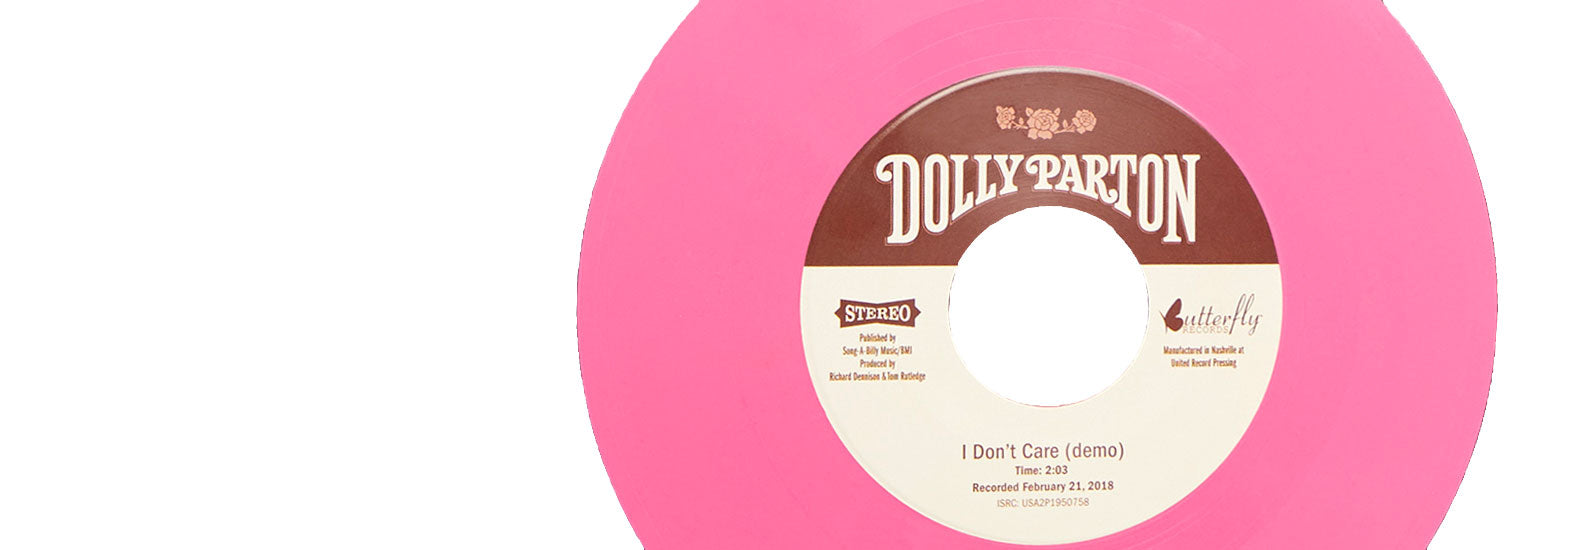 Dolly Parton Limited Edition record on pink vinyl